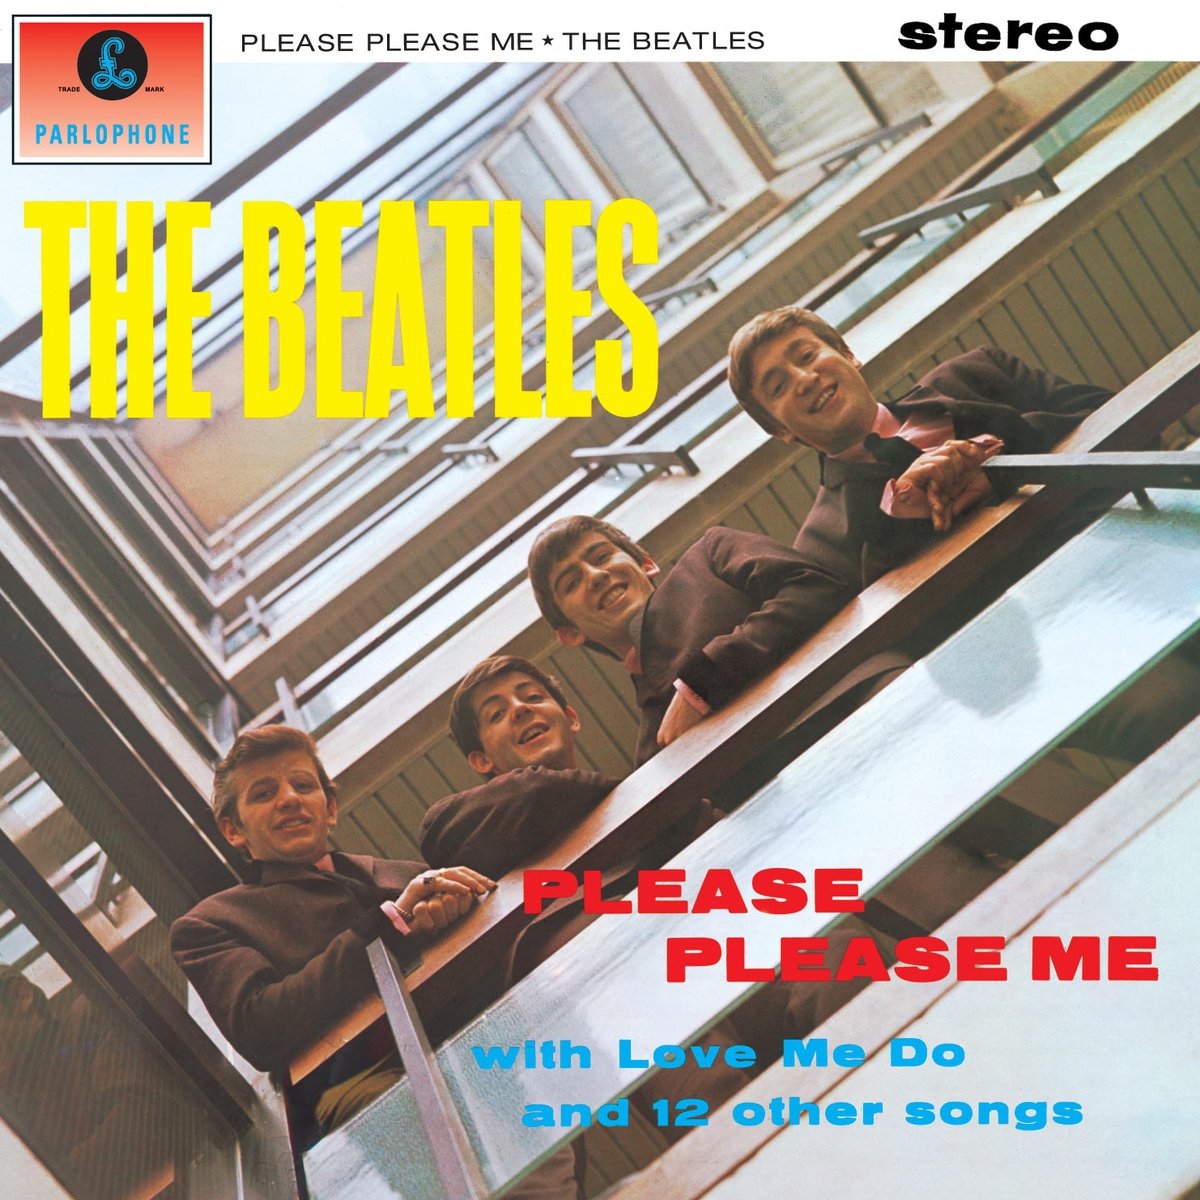 The Art of Album Covers .EMI house, Feb 1963. I was in the staircase well and asked if they were in the building. “Well, get them to look over, and I will take it from here.”I had to lie flat on my back in the entrance. I took some shots and said, “That’ll do" - Angus McBean